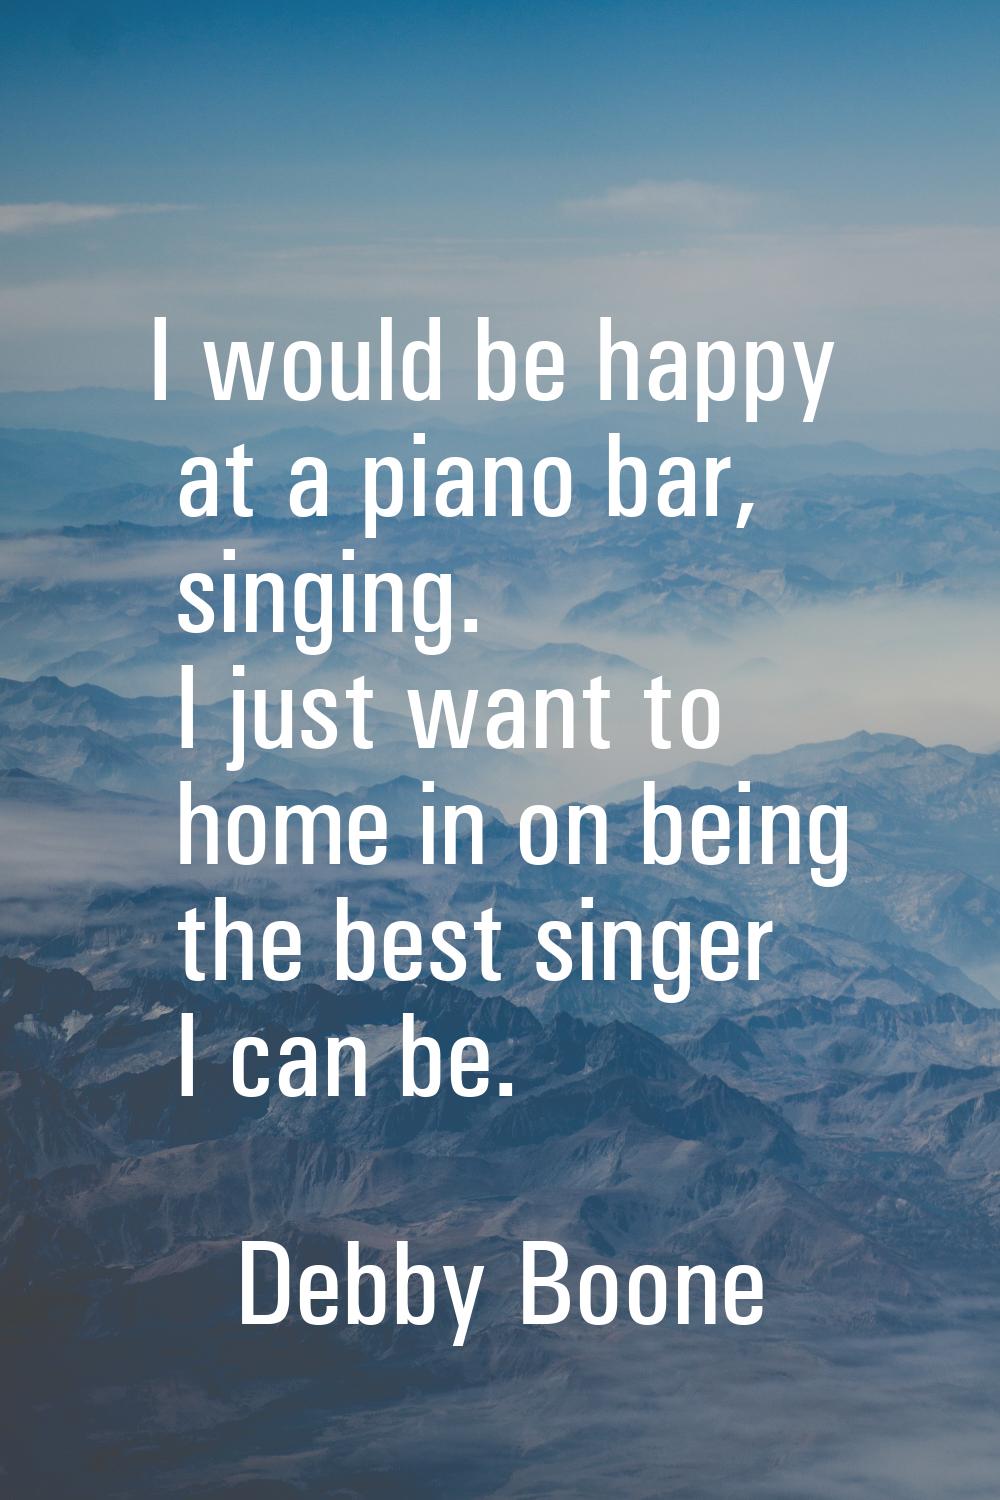 I would be happy at a piano bar, singing. I just want to home in on being the best singer I can be.